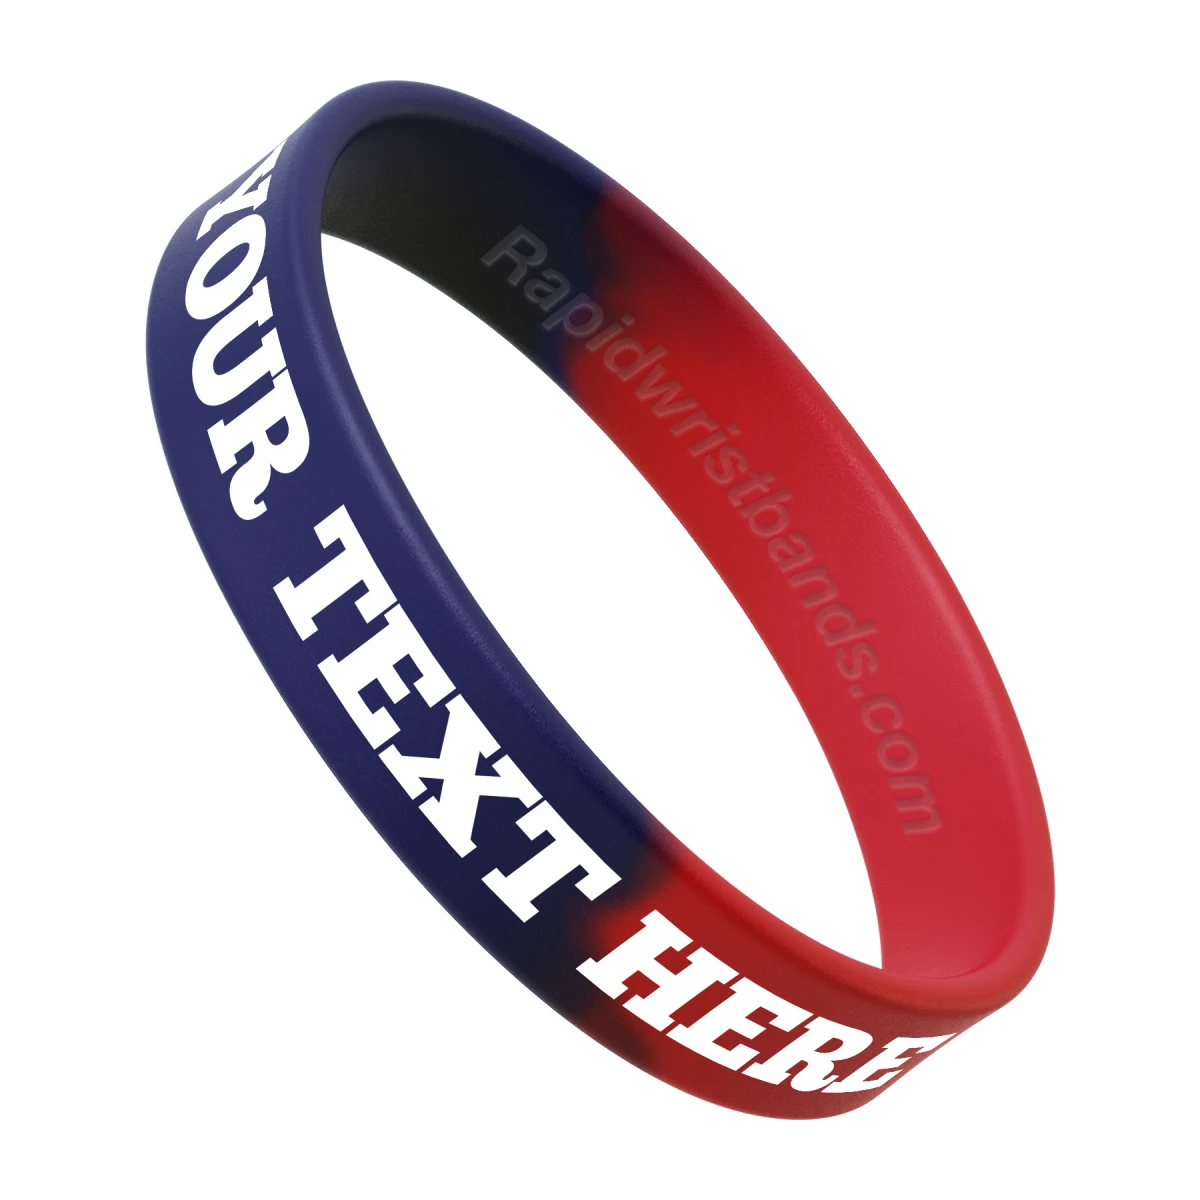 Segmented Navy Blue/Red Wristband With Your Text Here Printed In White